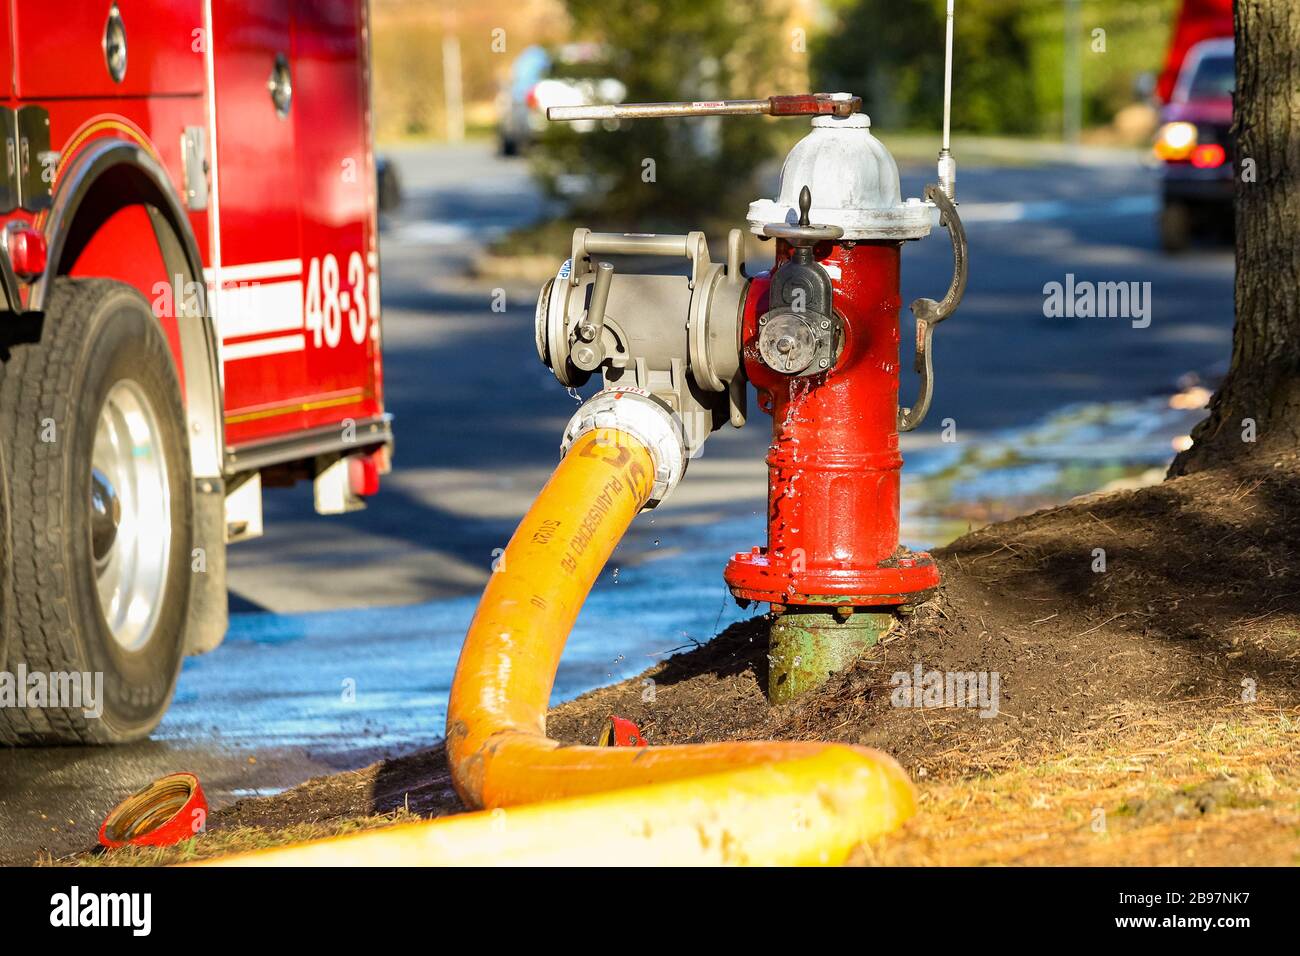 https://c8.alamy.com/comp/2B97NK7/fire-hydrant-water-supply-during-emergency-hooked-to-hose-at-day-2B97NK7.jpg